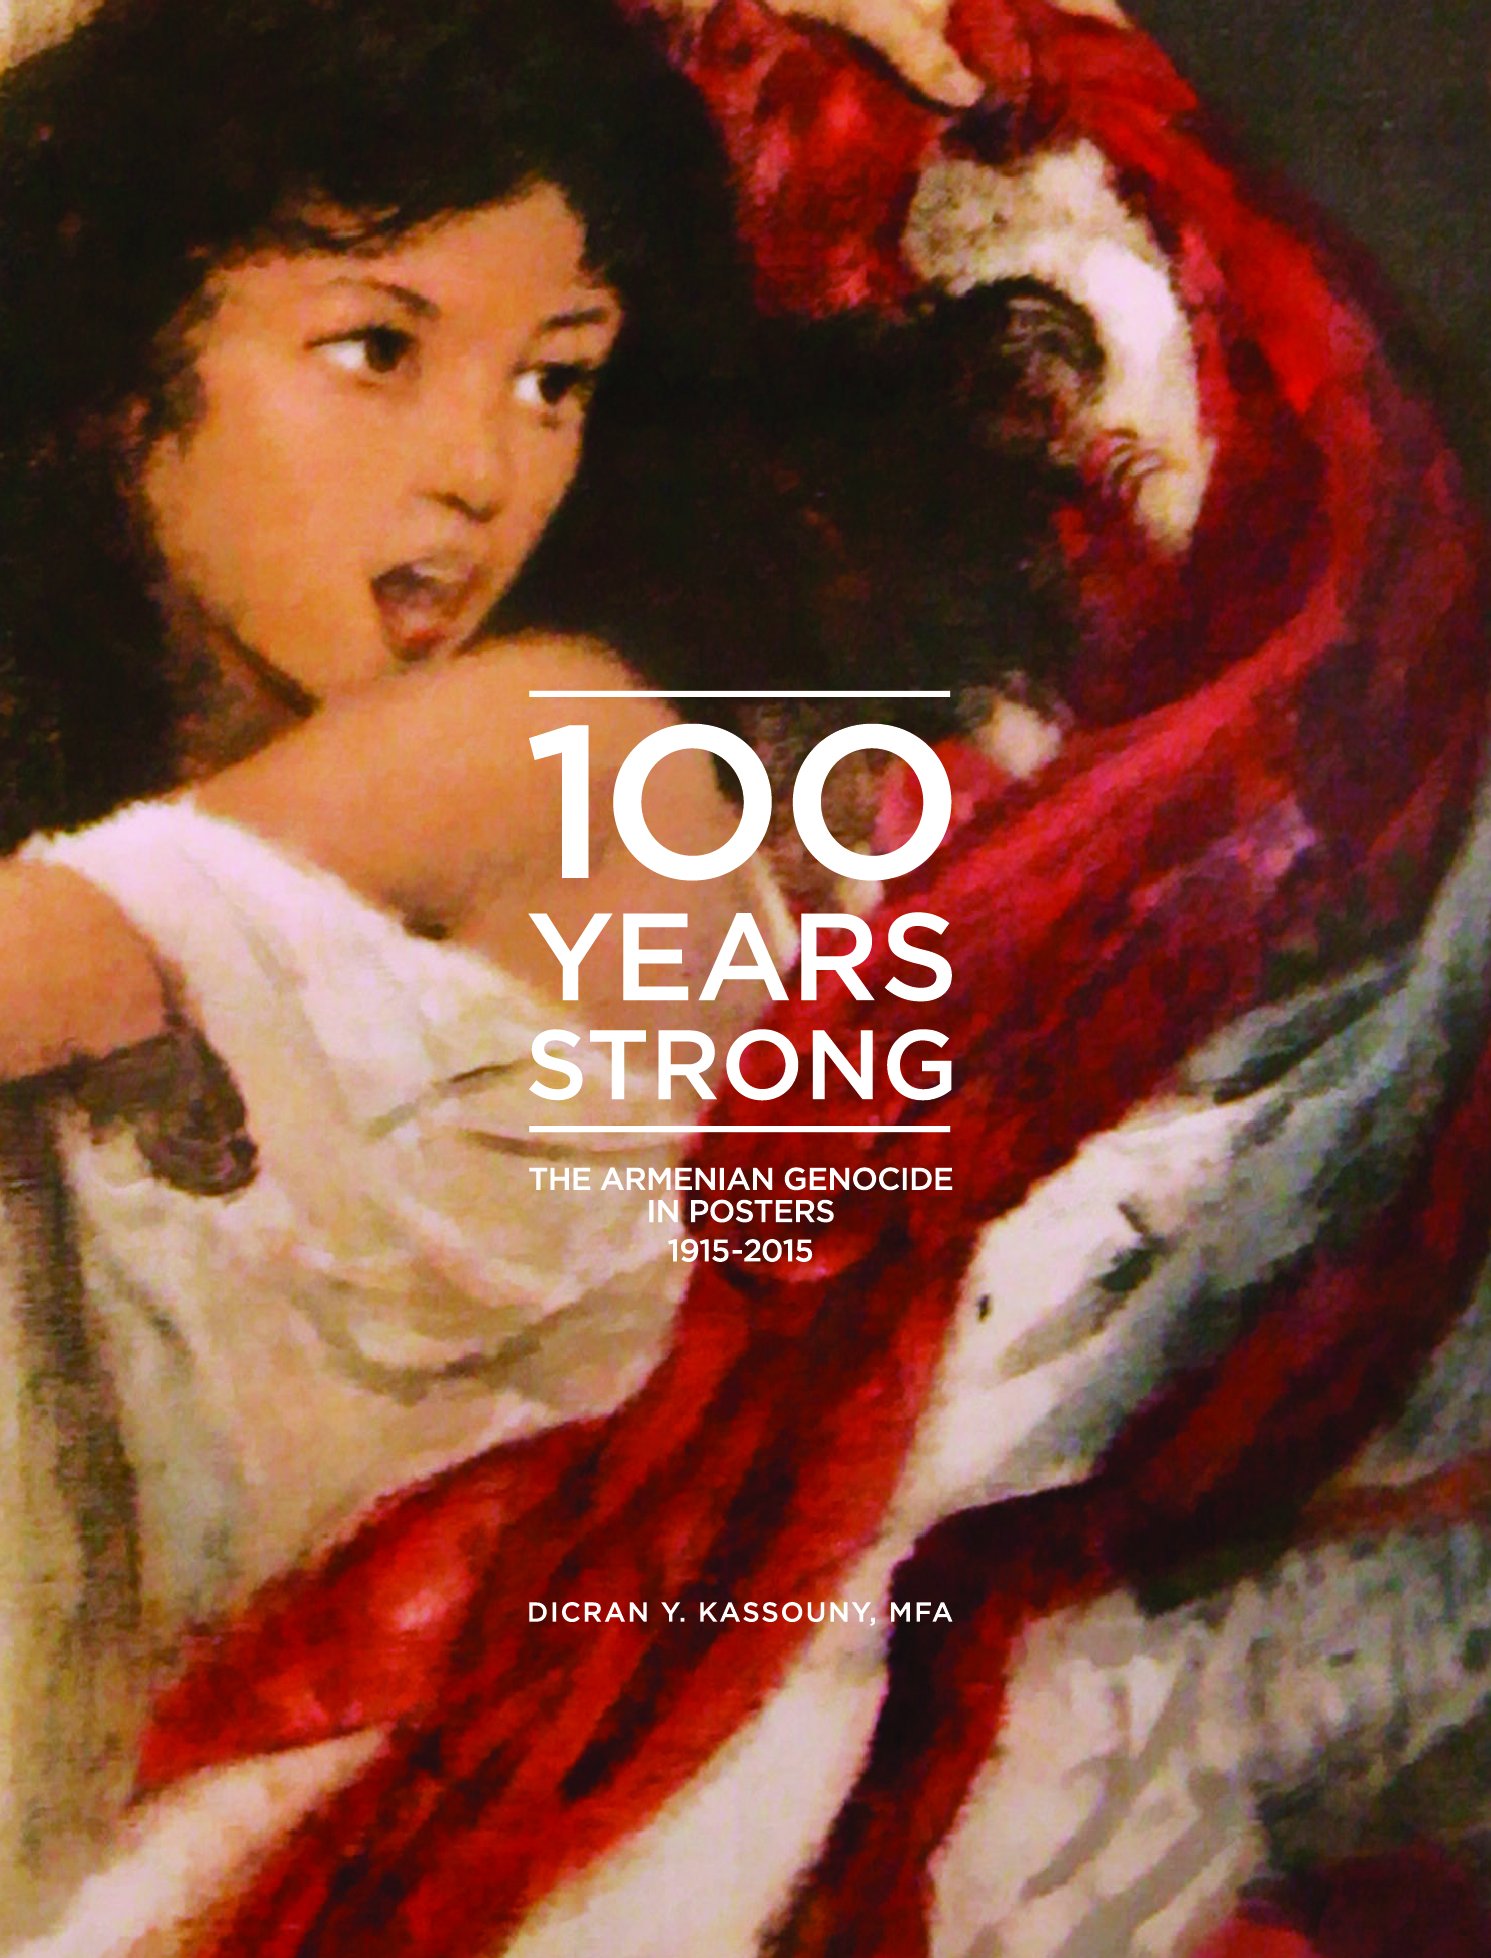 The cover of 100 Years Strong: The Armenian Genocide in Posters 1915-2015